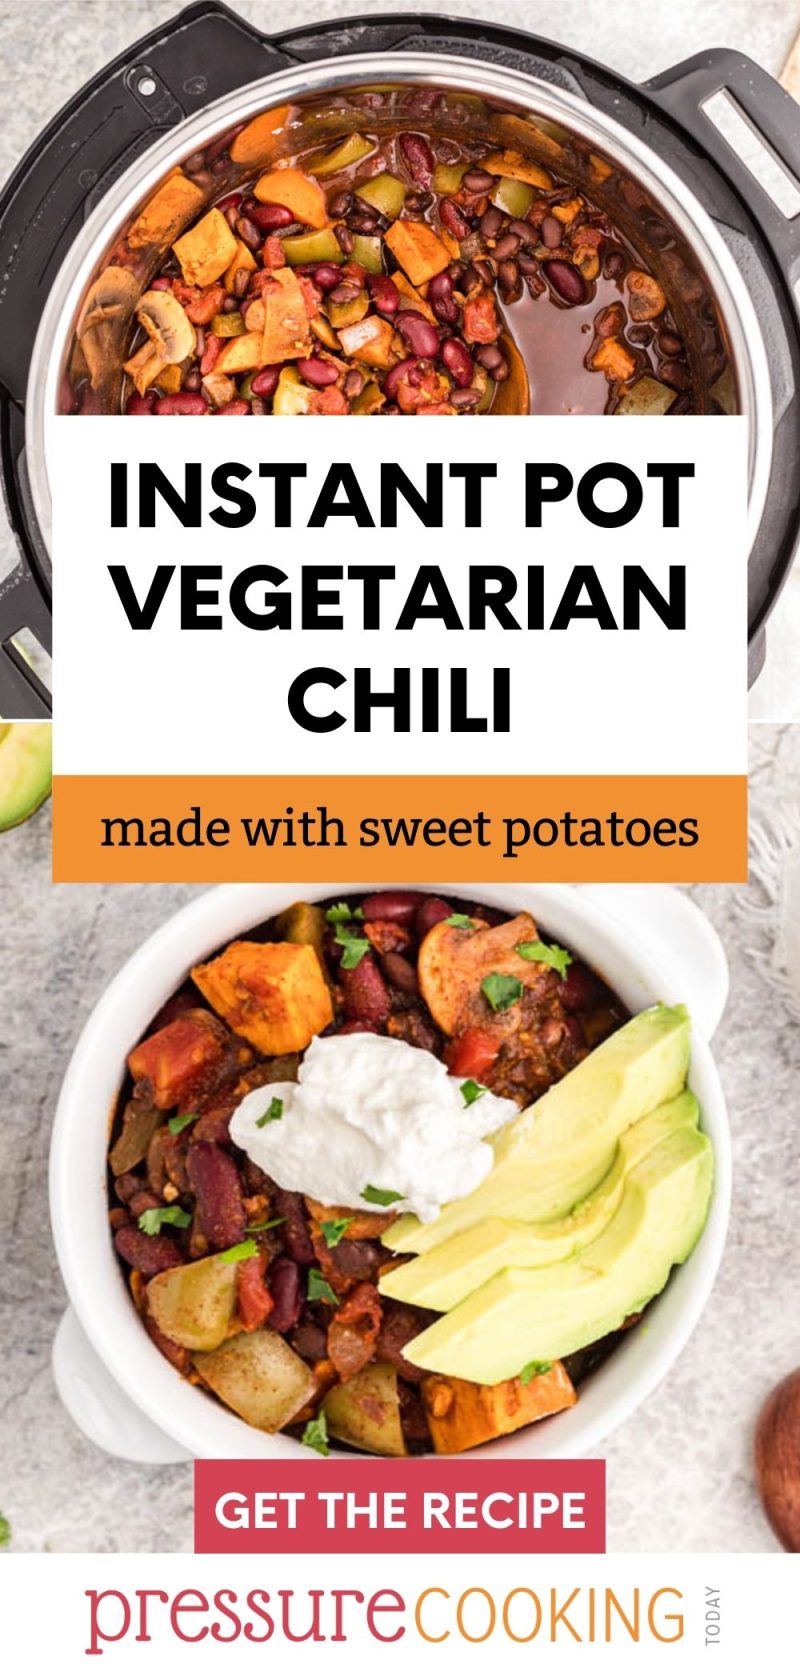 pinterest image that reads "Instant Pot Vegetarian Chili: made with sweet potatoes" overlaid on two photos: the top photo of an Instant Pot filled with cooked chili and the bottom photo dished up in a pretty white bowl with handles where the chili clearly shows the sweet potatoes, black and pinto beans, and mushrooms, garnished with sour cream and sliced avocados